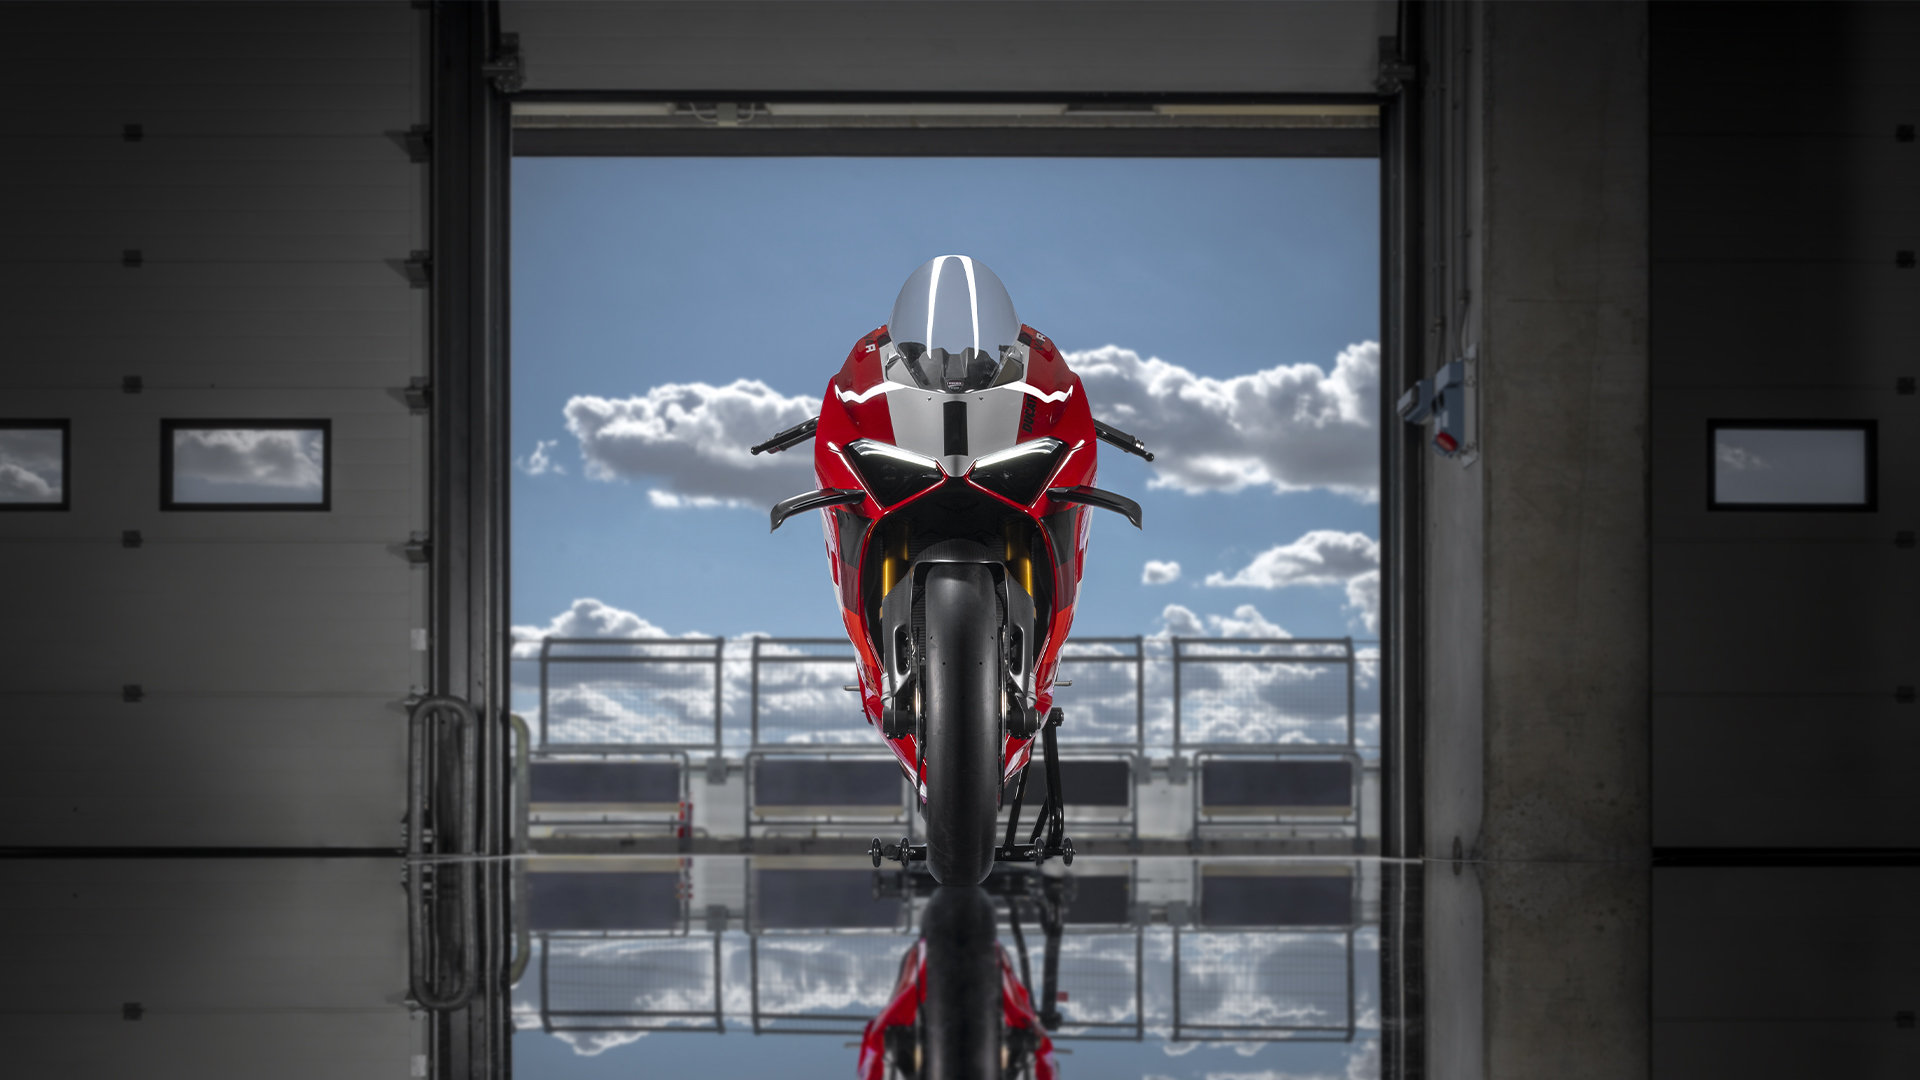 Ducati-Panigale-V4R-MY23-performance-gallery-02-01-1920x1080